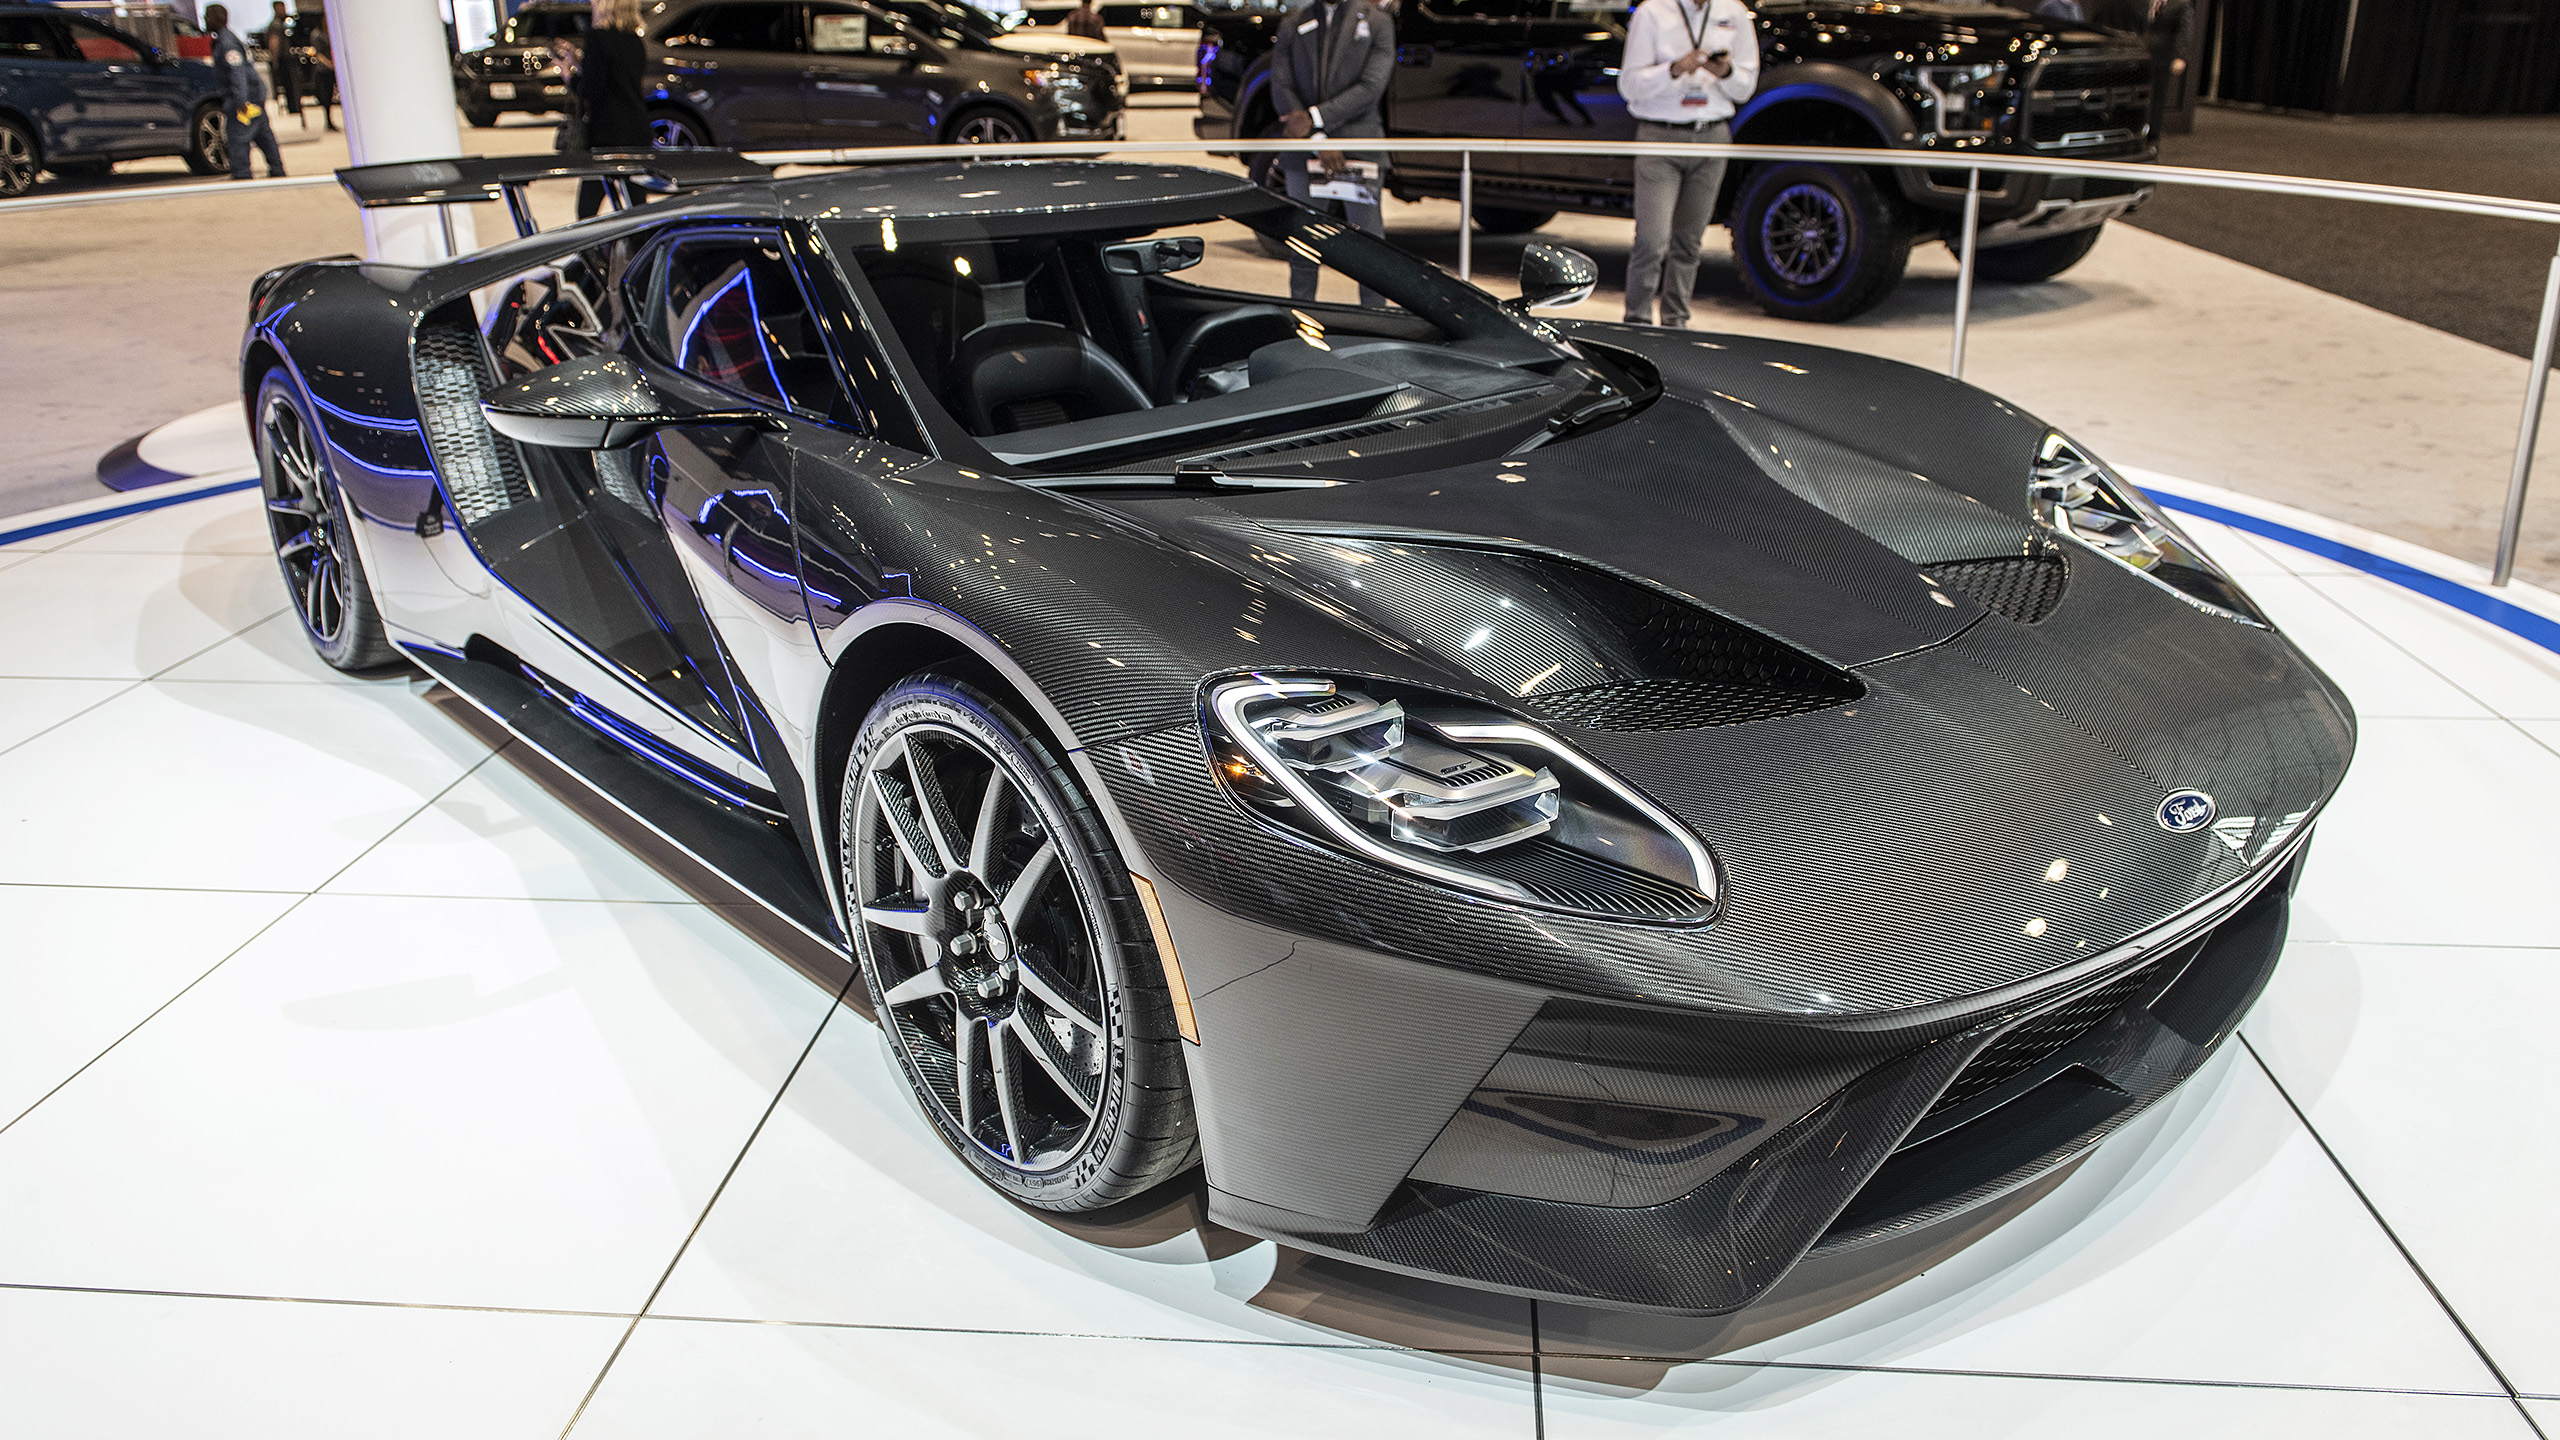 Mauve Facet Niet ingewikkeld 2020 Ford GT gets more power, full carbon fiber body in surprise update |  RK Motors Classic Cars and Muscle Cars for Sale